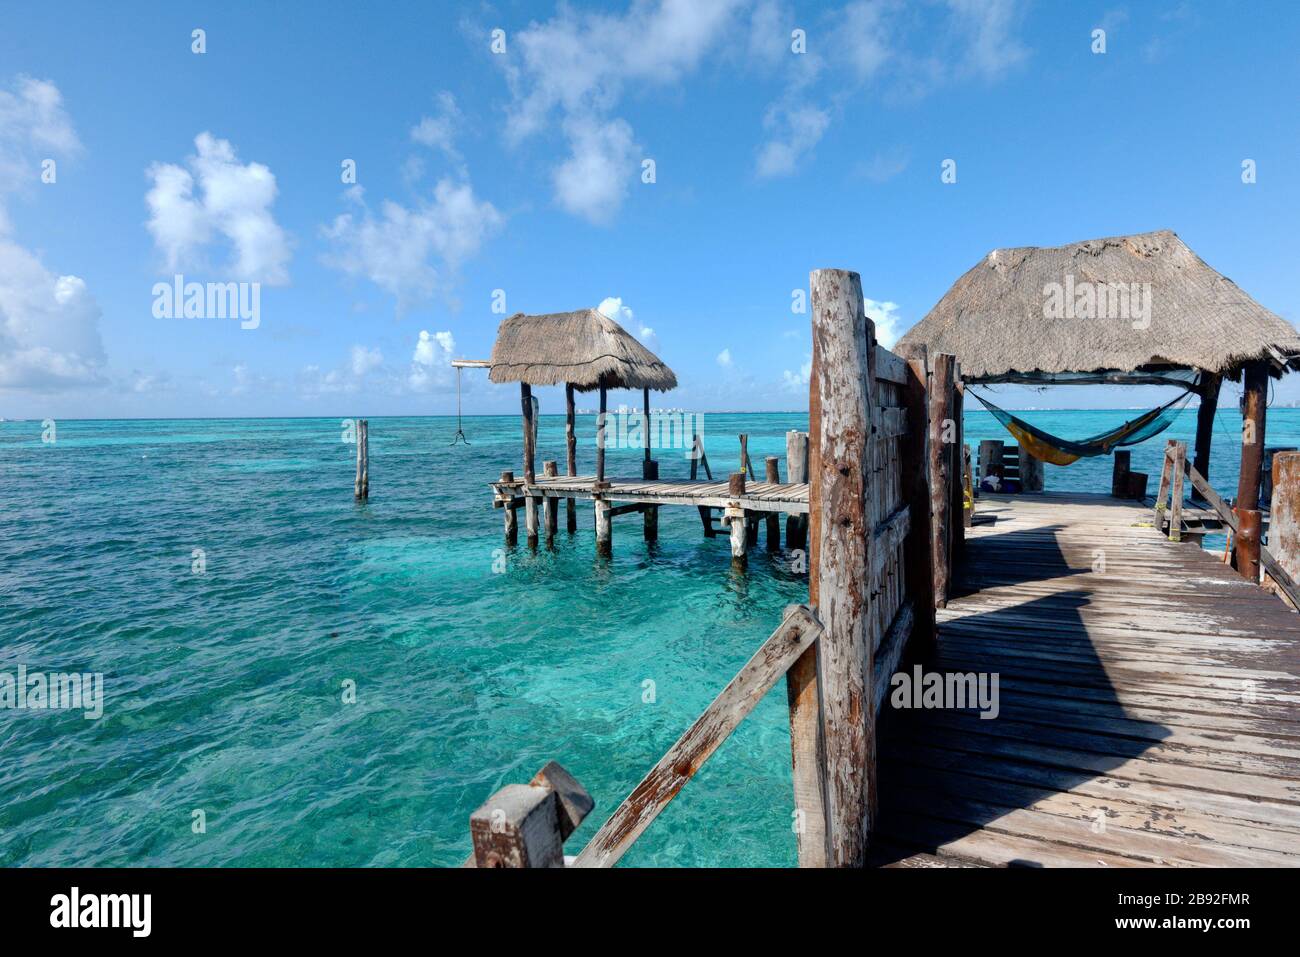 Wooden pier on the Caribbean sea, tourist relaxes in a hammock Stock Photo